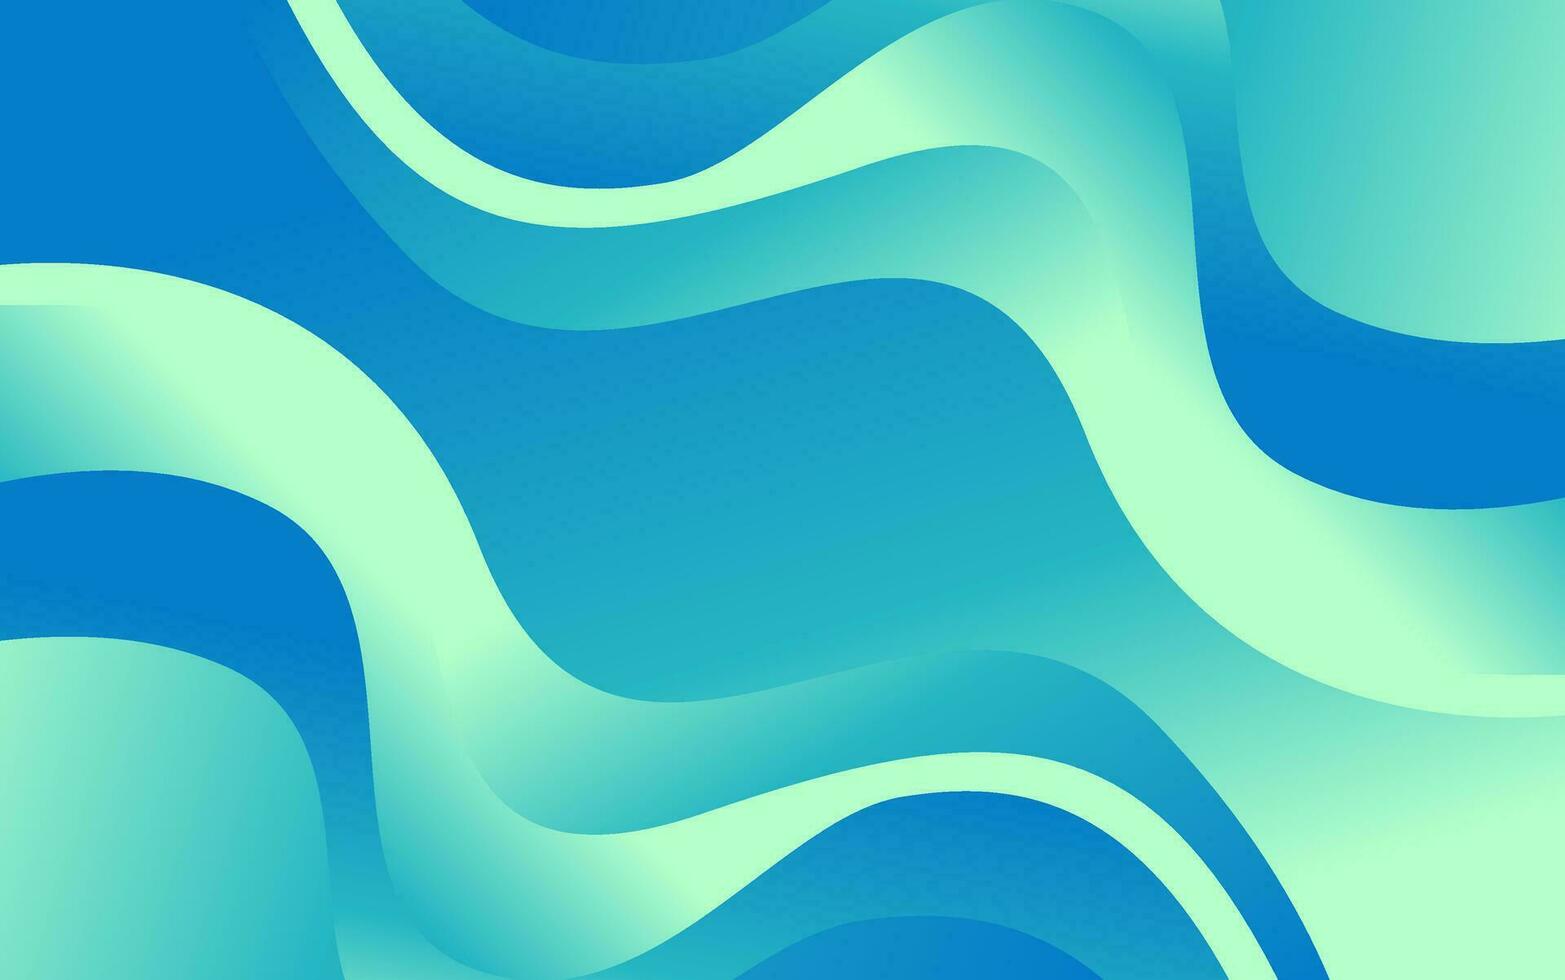 abstract blue liquid wave shape modern futuristic banner, poster, cover, background design vector